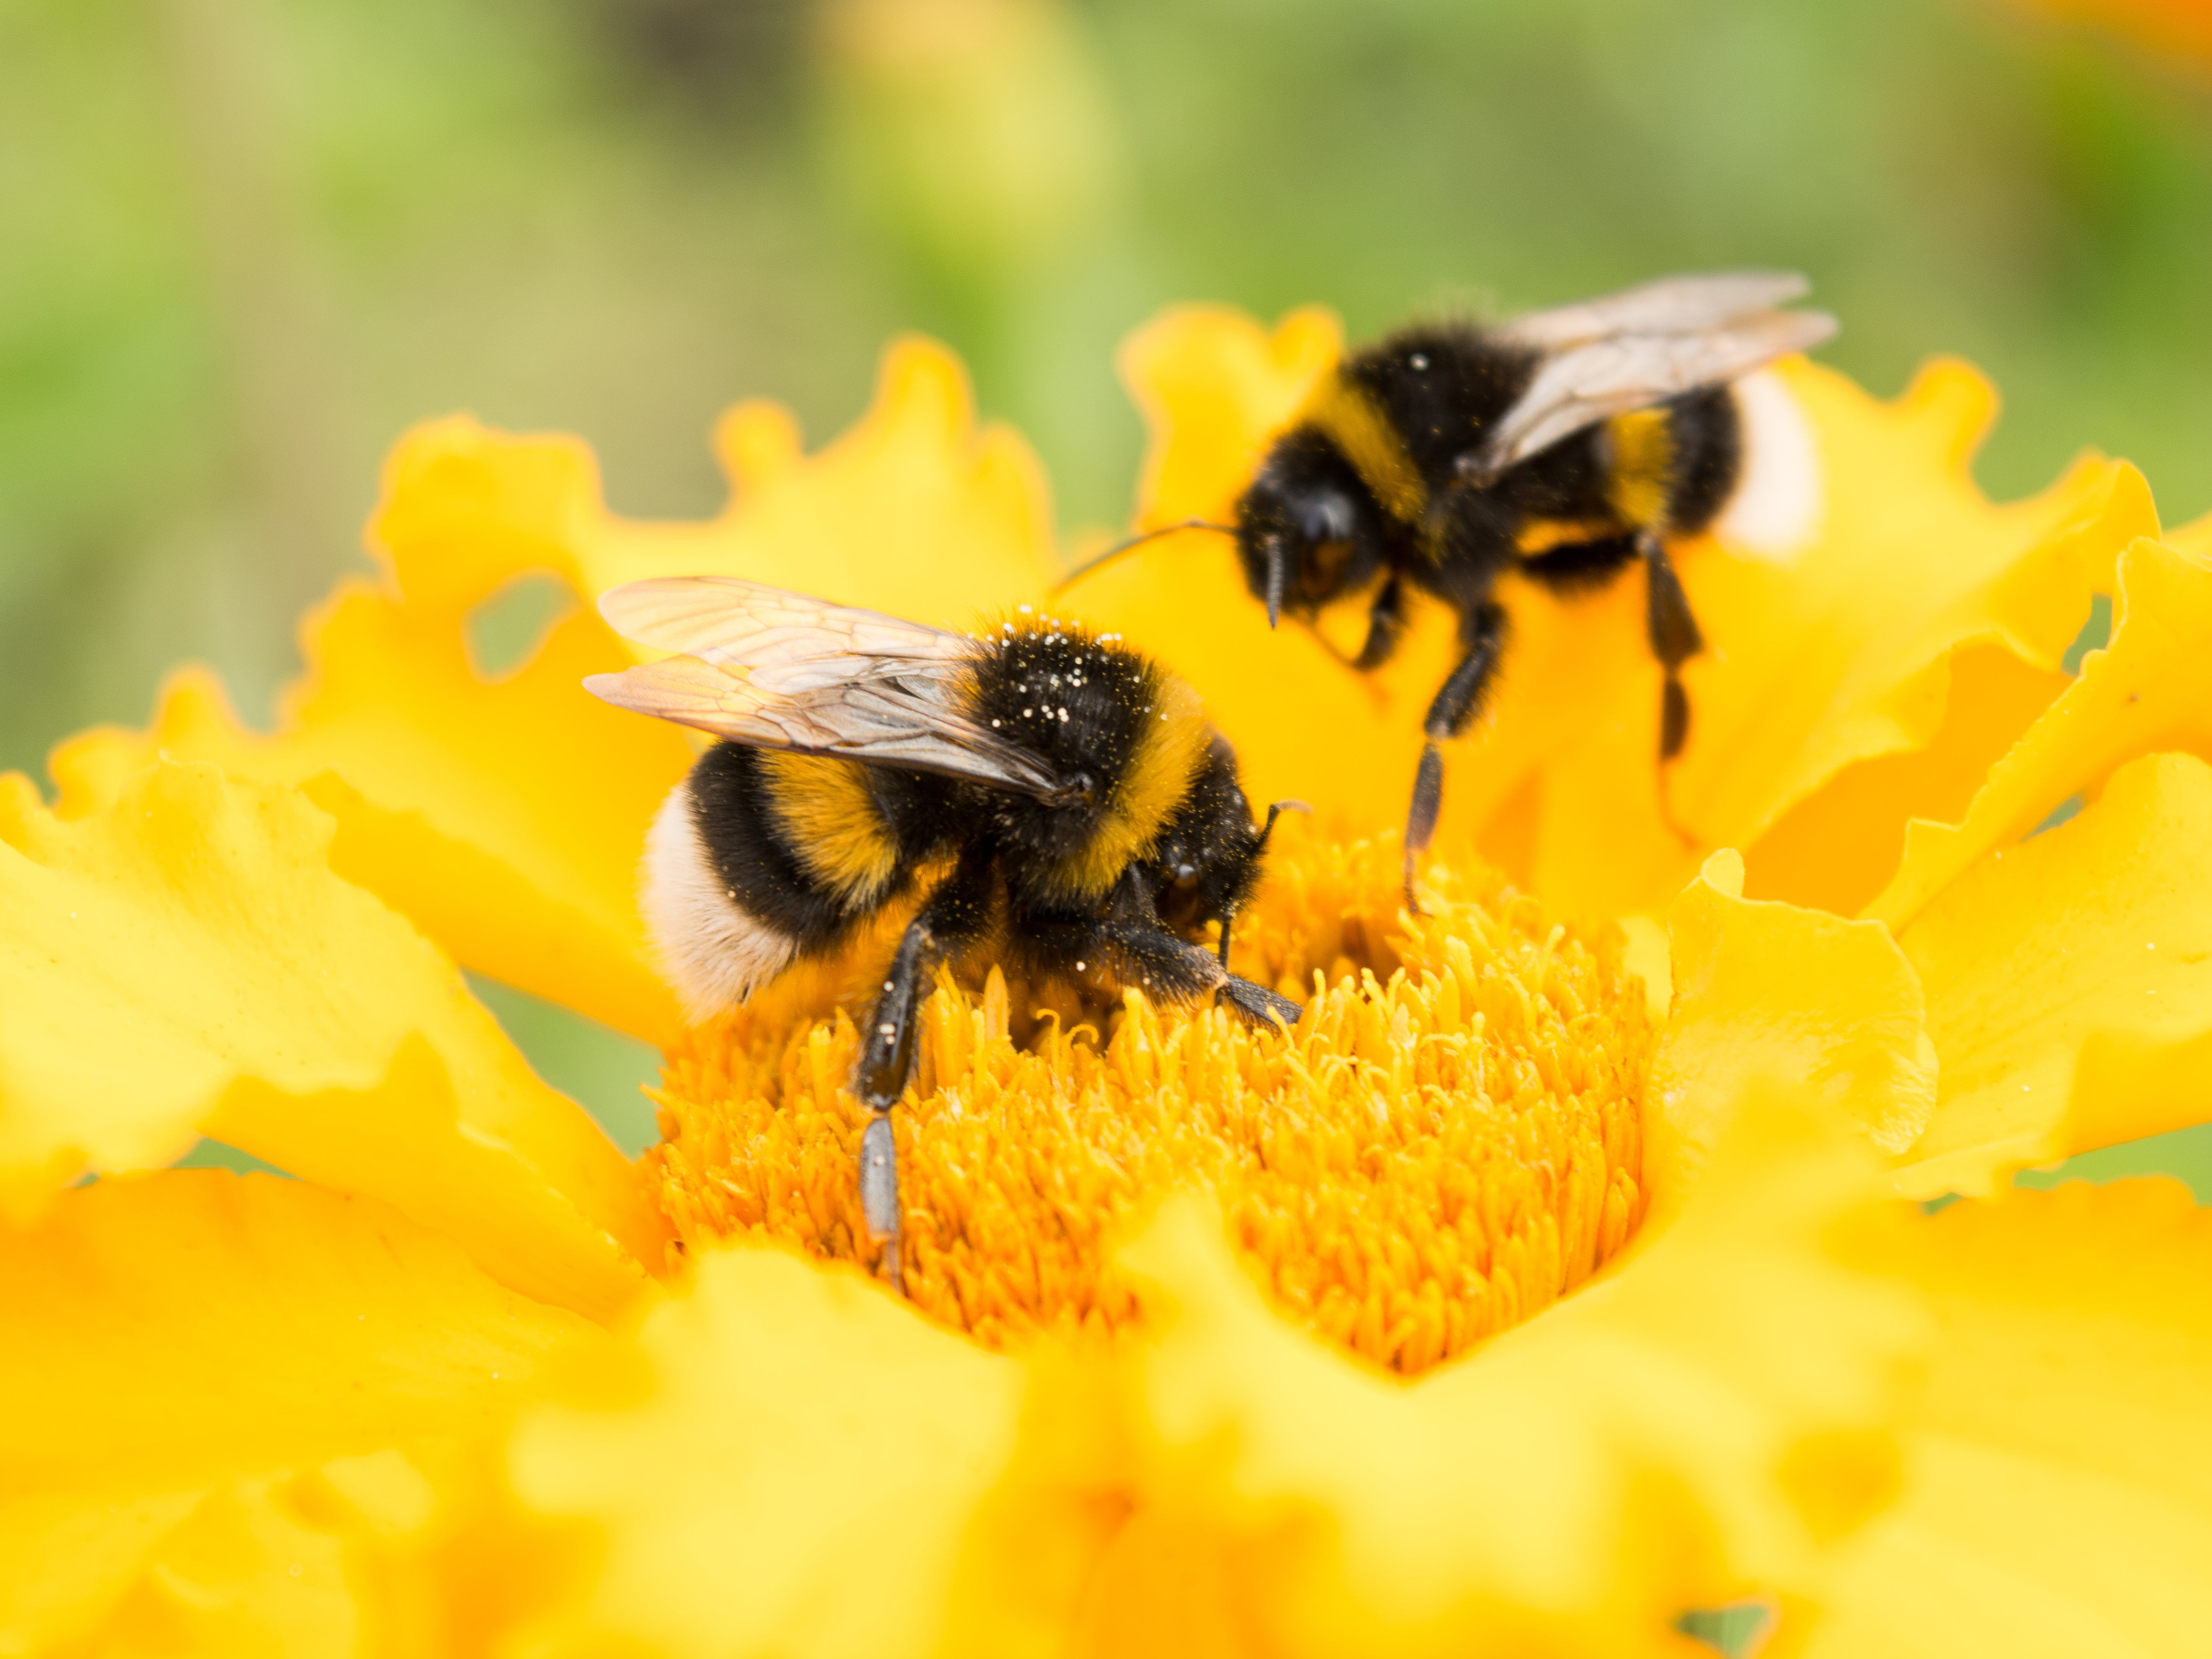 Common pollutants can affect pollination levels, researchers say